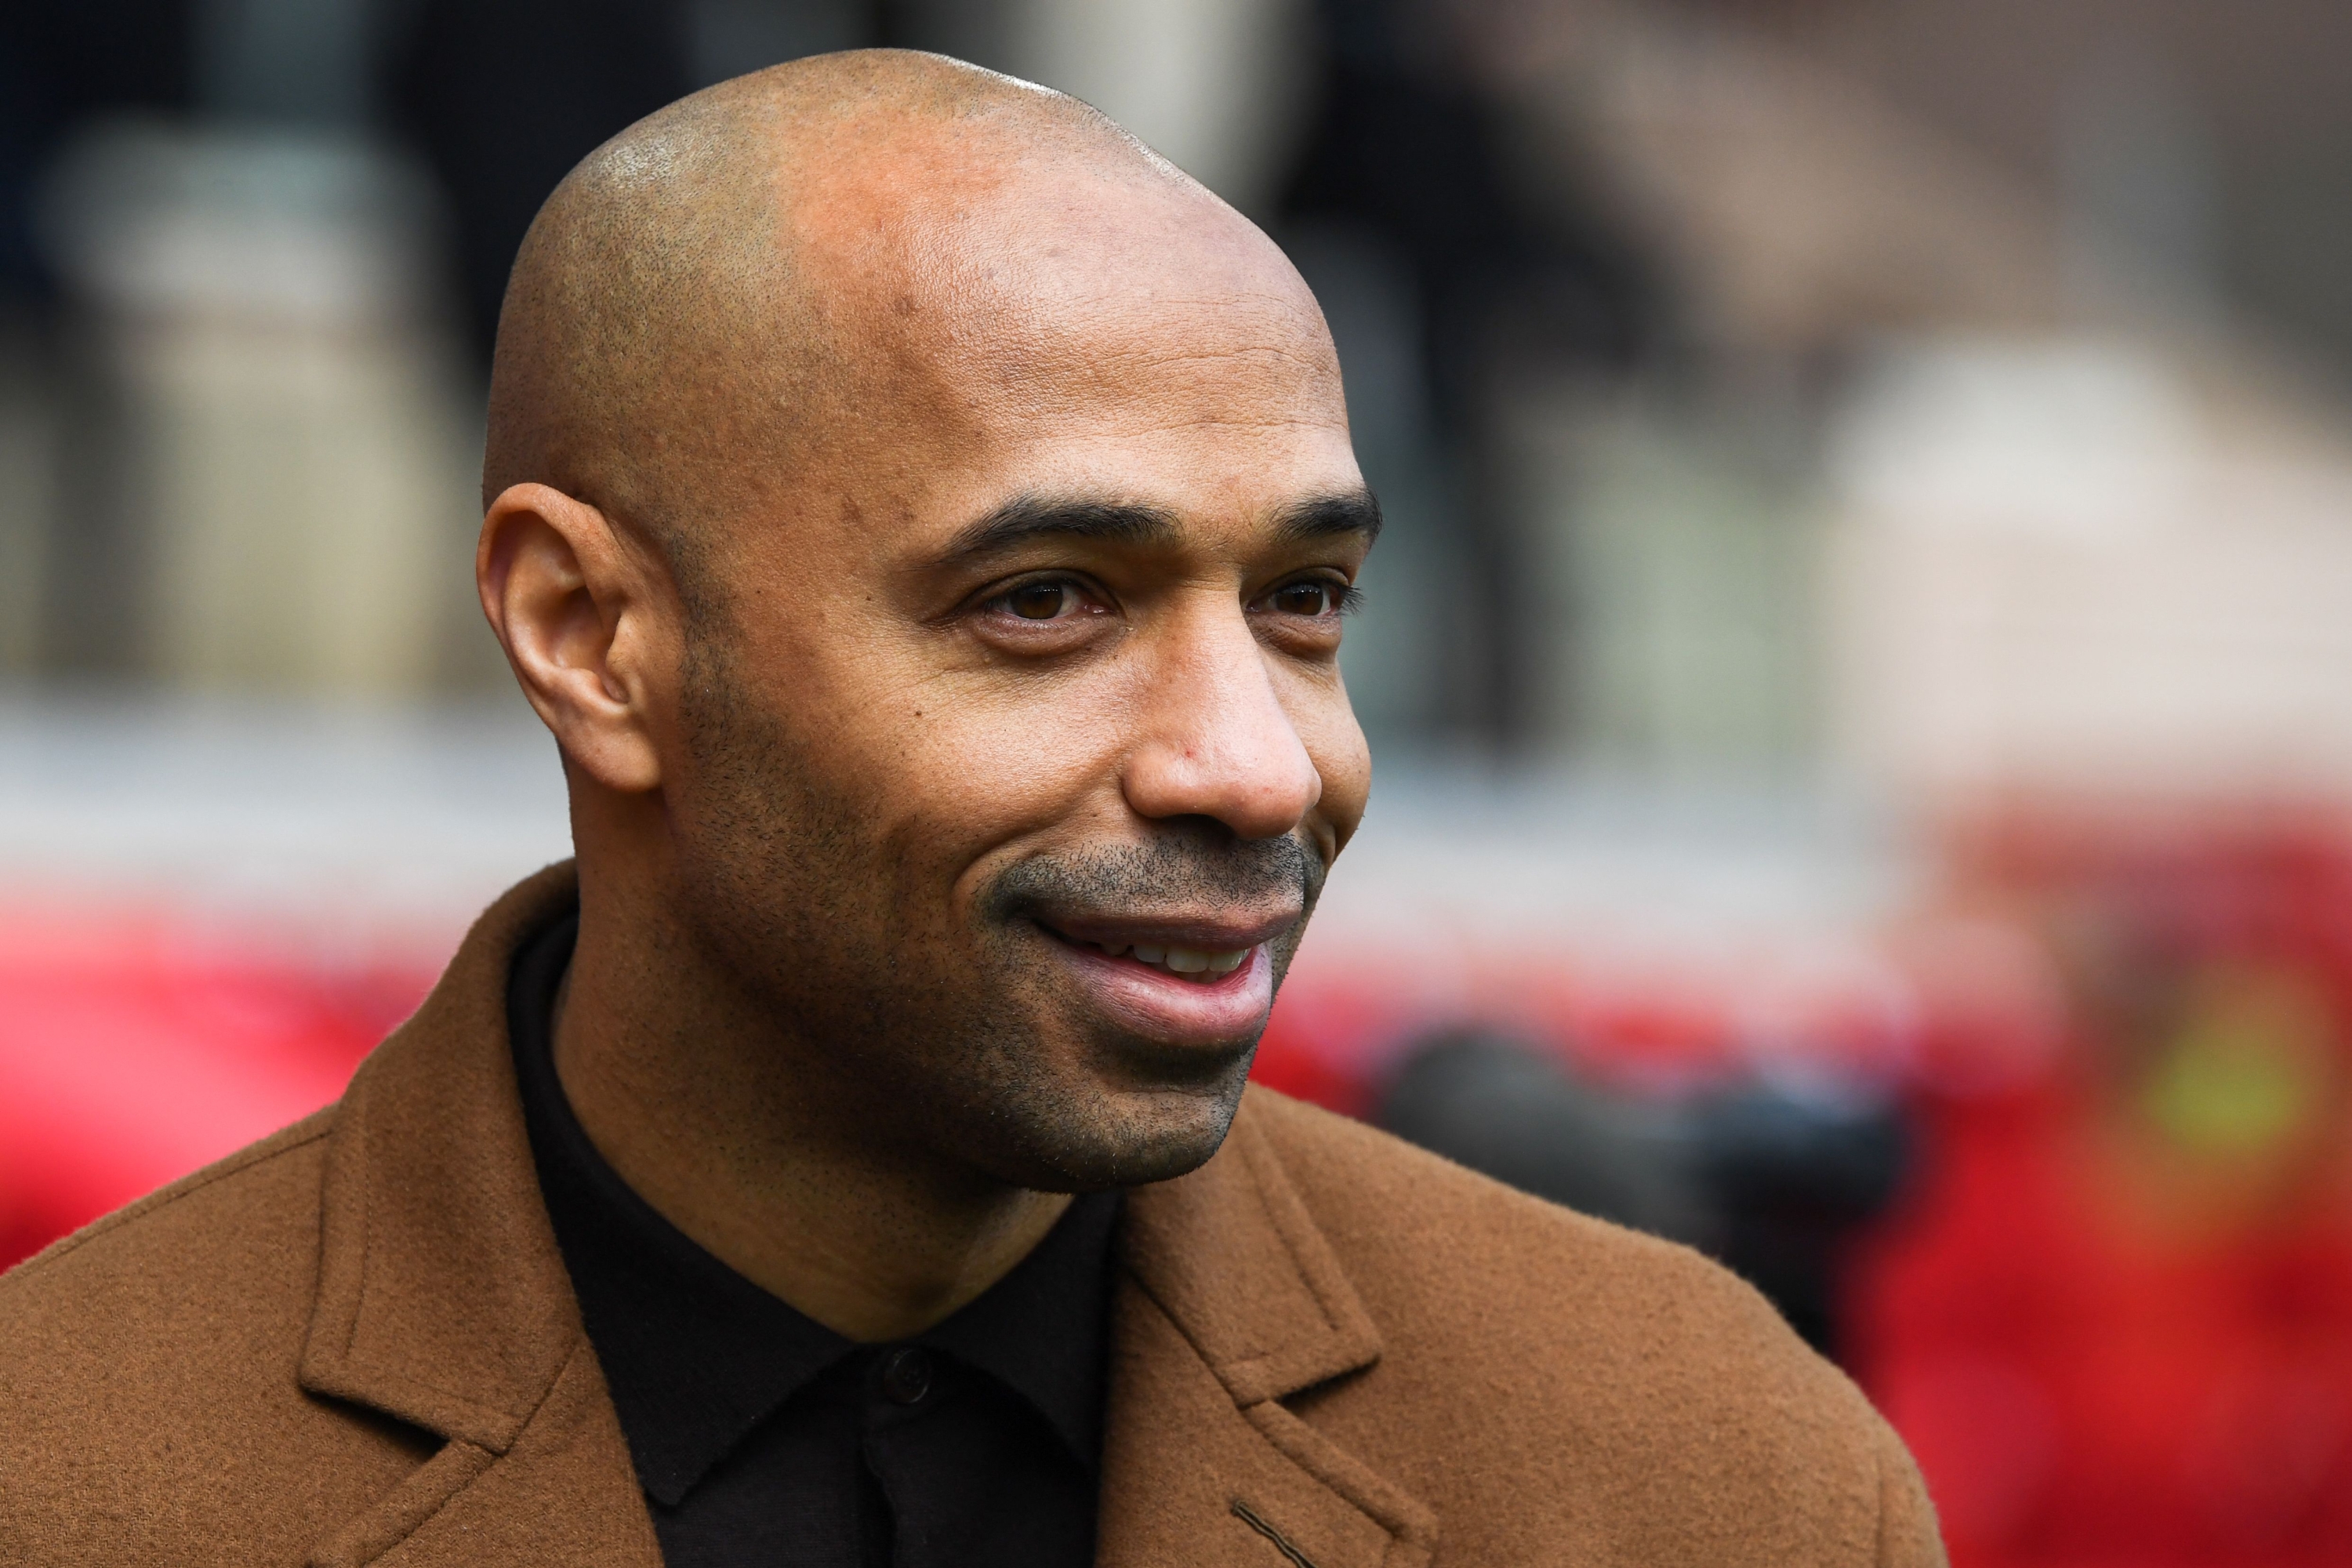 Former French player and TV host Thierry Henry smiles ahead of the French L1 football match between AS Monaco and Paris Saint Germain (PSG) at the Louis II Stadium (Stade Louis II) in the Principality of Monaco on March 20, 2022. (Photo by CLEMENT MAHOUDEAU / AFP)